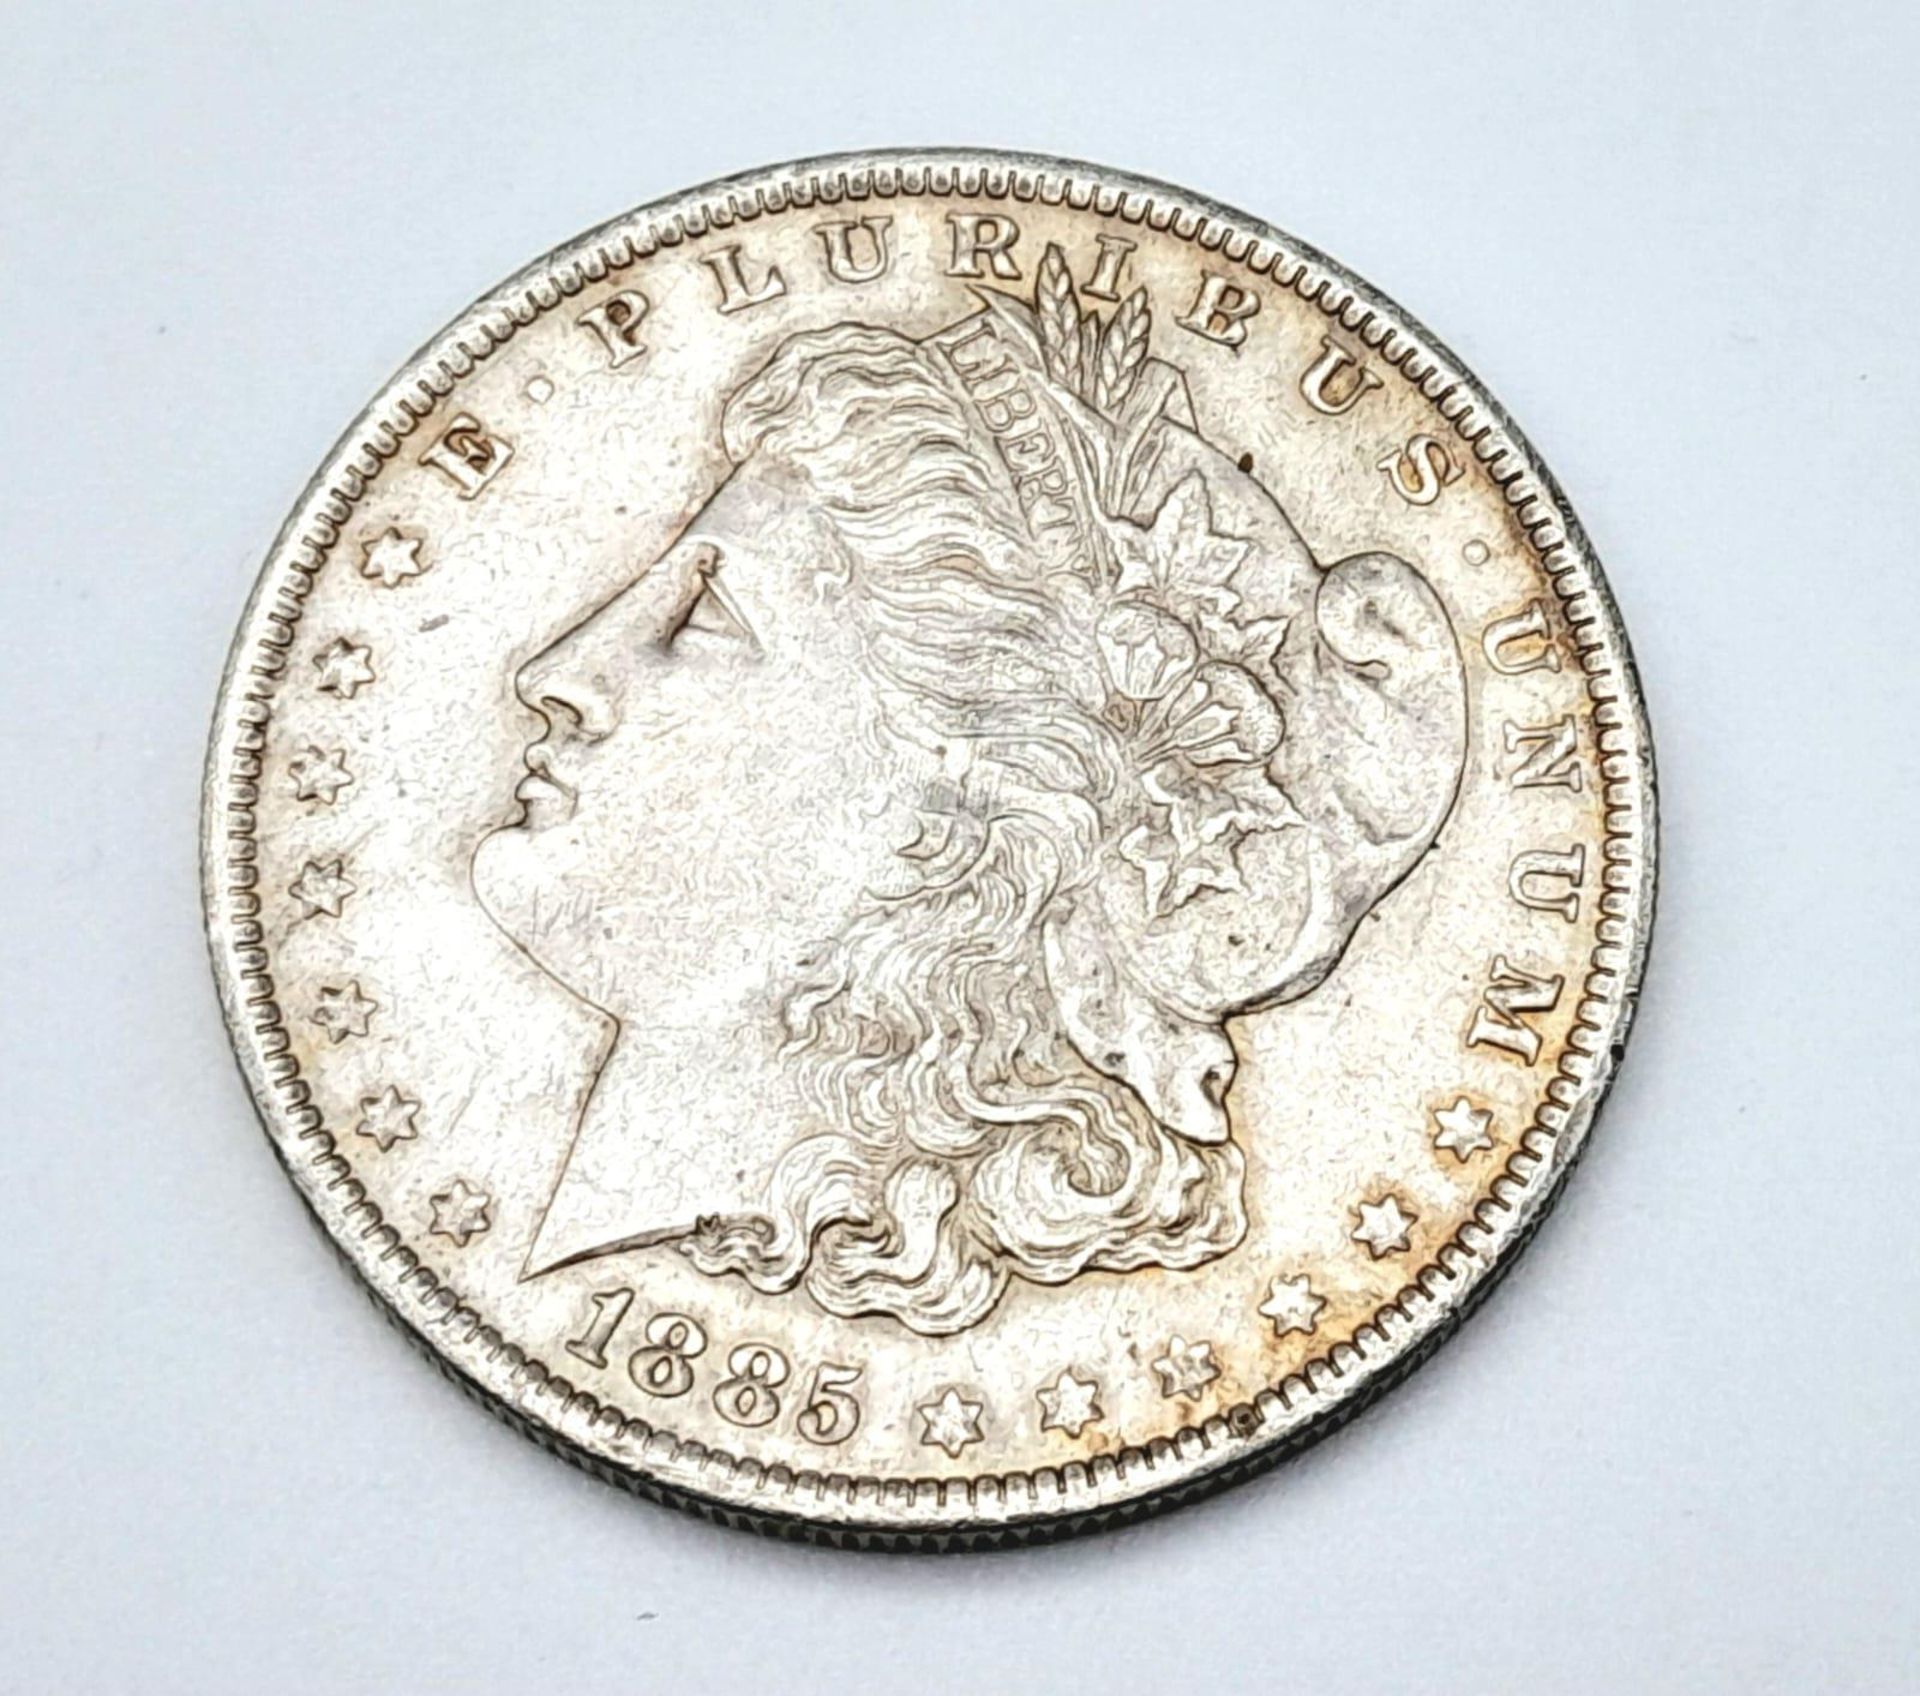 An Extremely Fine Condition 1885 New Orleans Mint Morgan Dollar 26.78 Grams. Graded on Sheldon